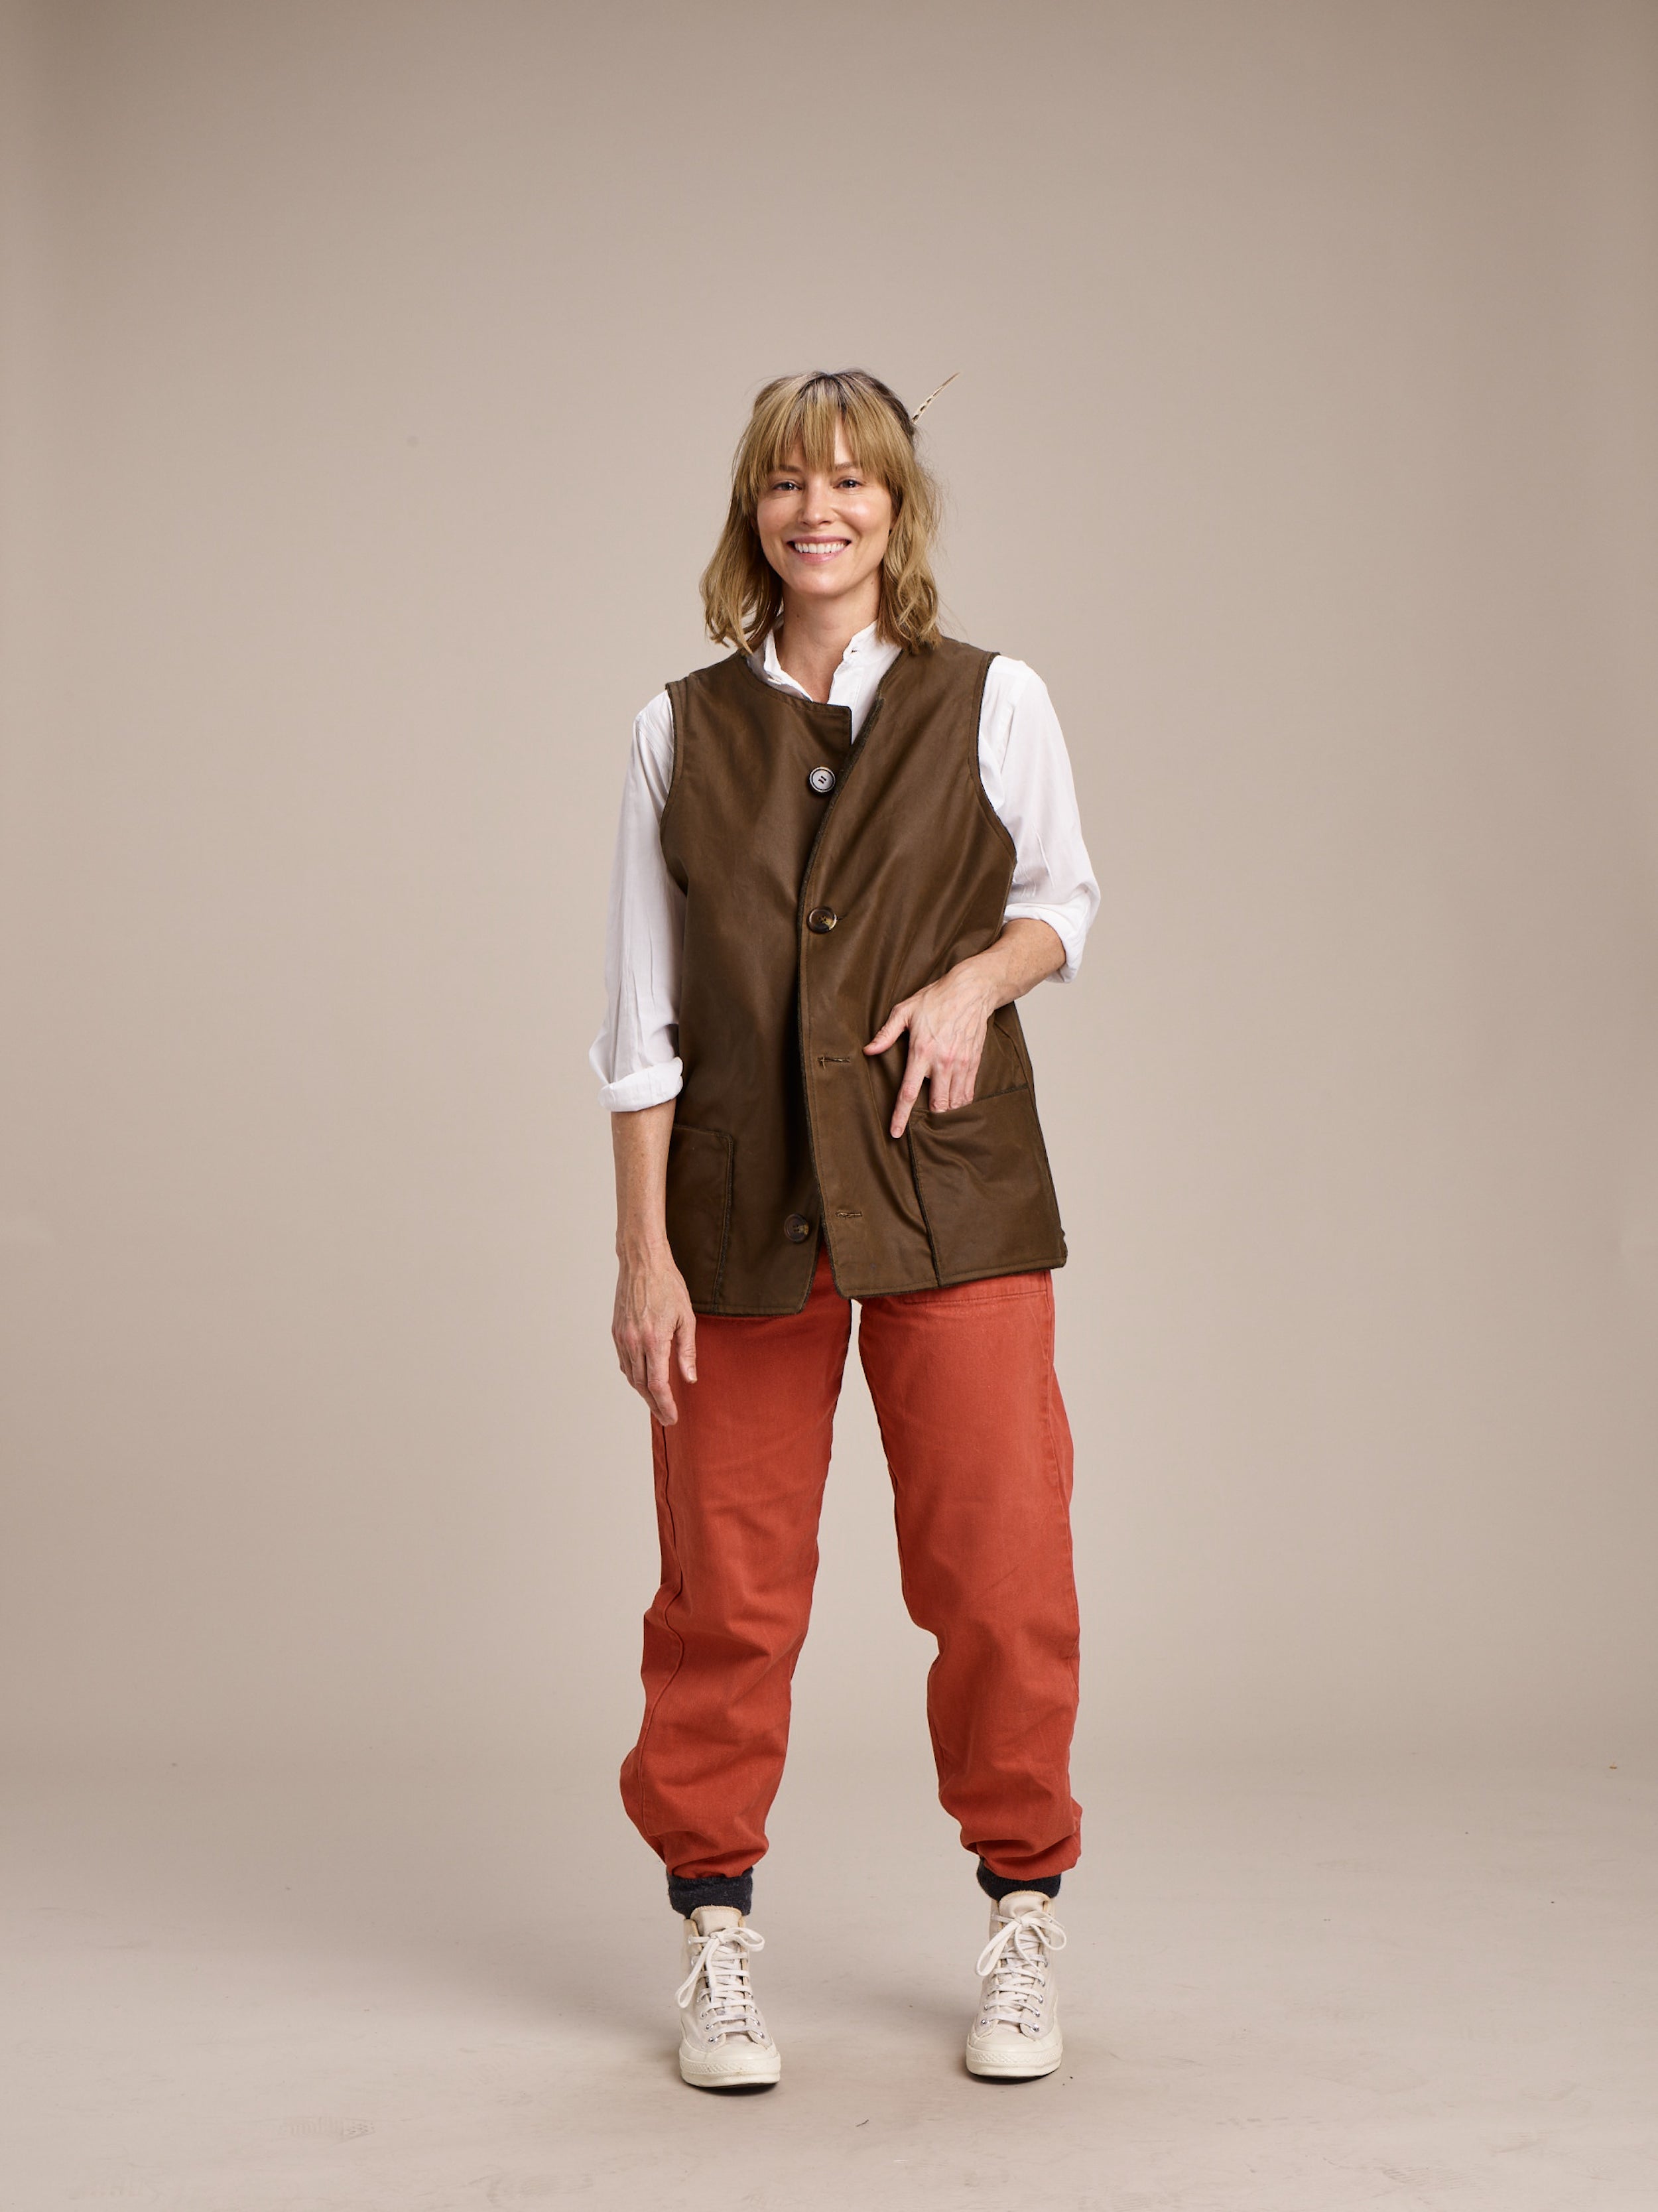 Woman wears Carrier Company Women's Work Trousers in Orange with Wax Jerkin and Lightweight Collarless Shirt